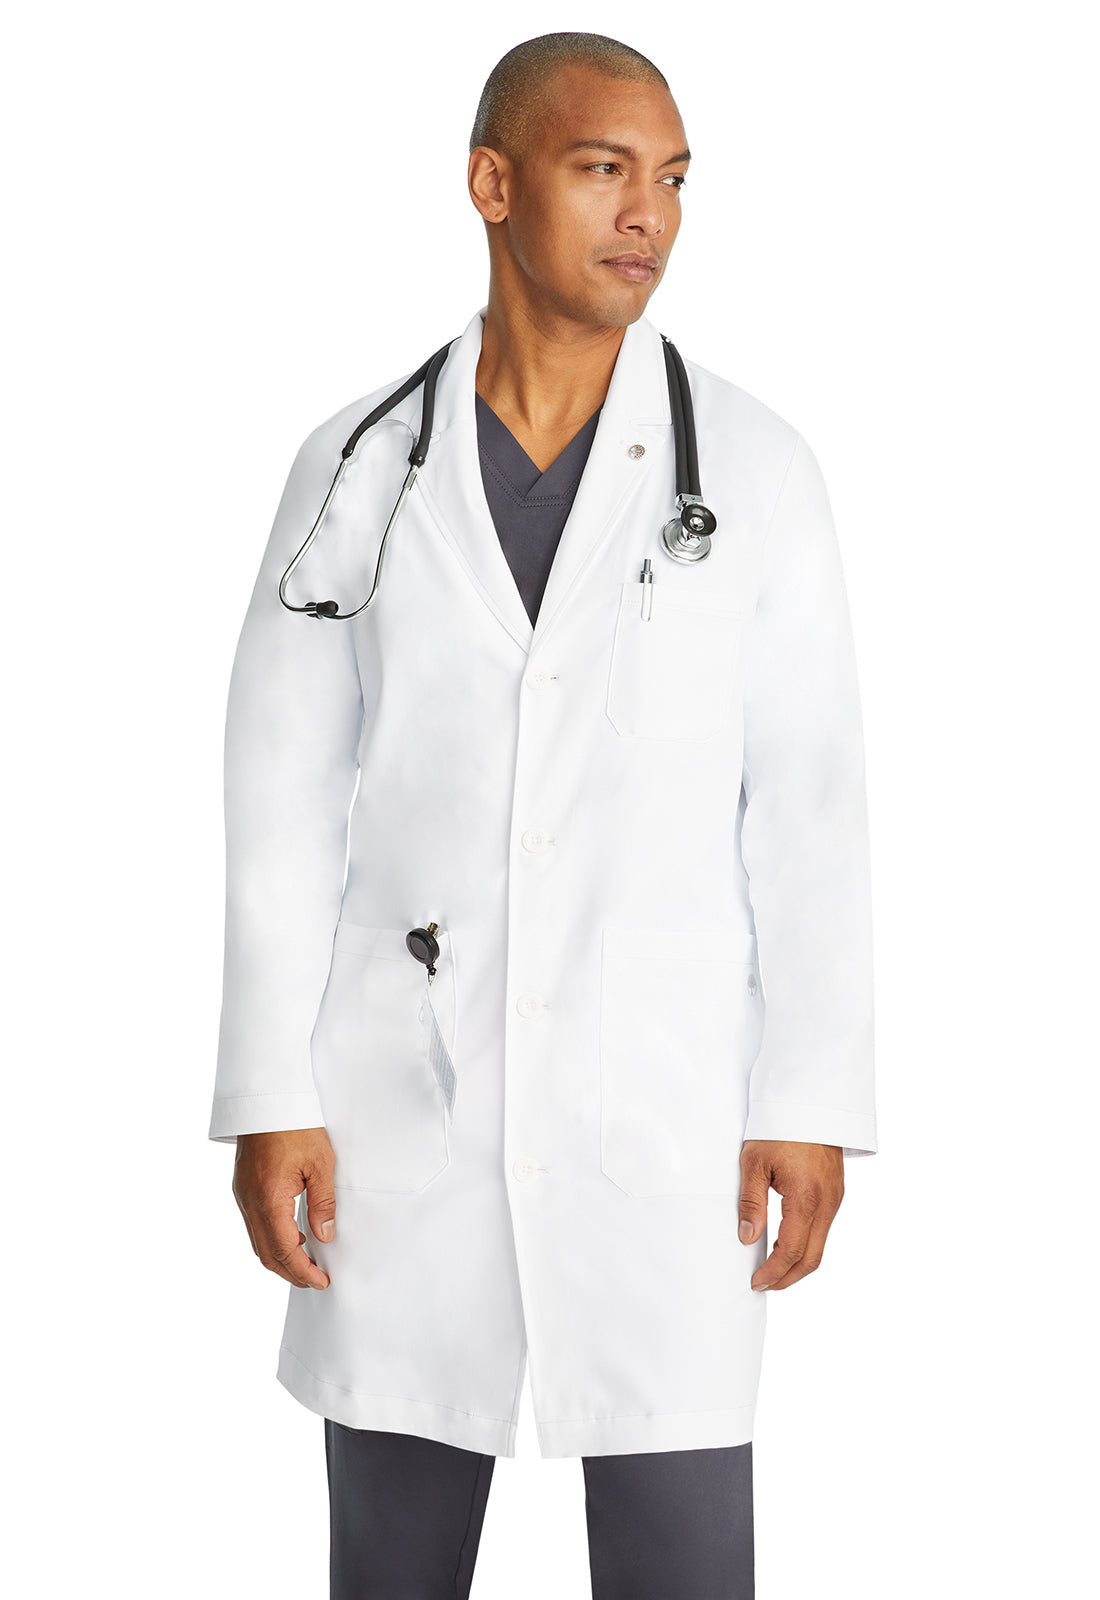 The White Coat by Healing Hands Men&